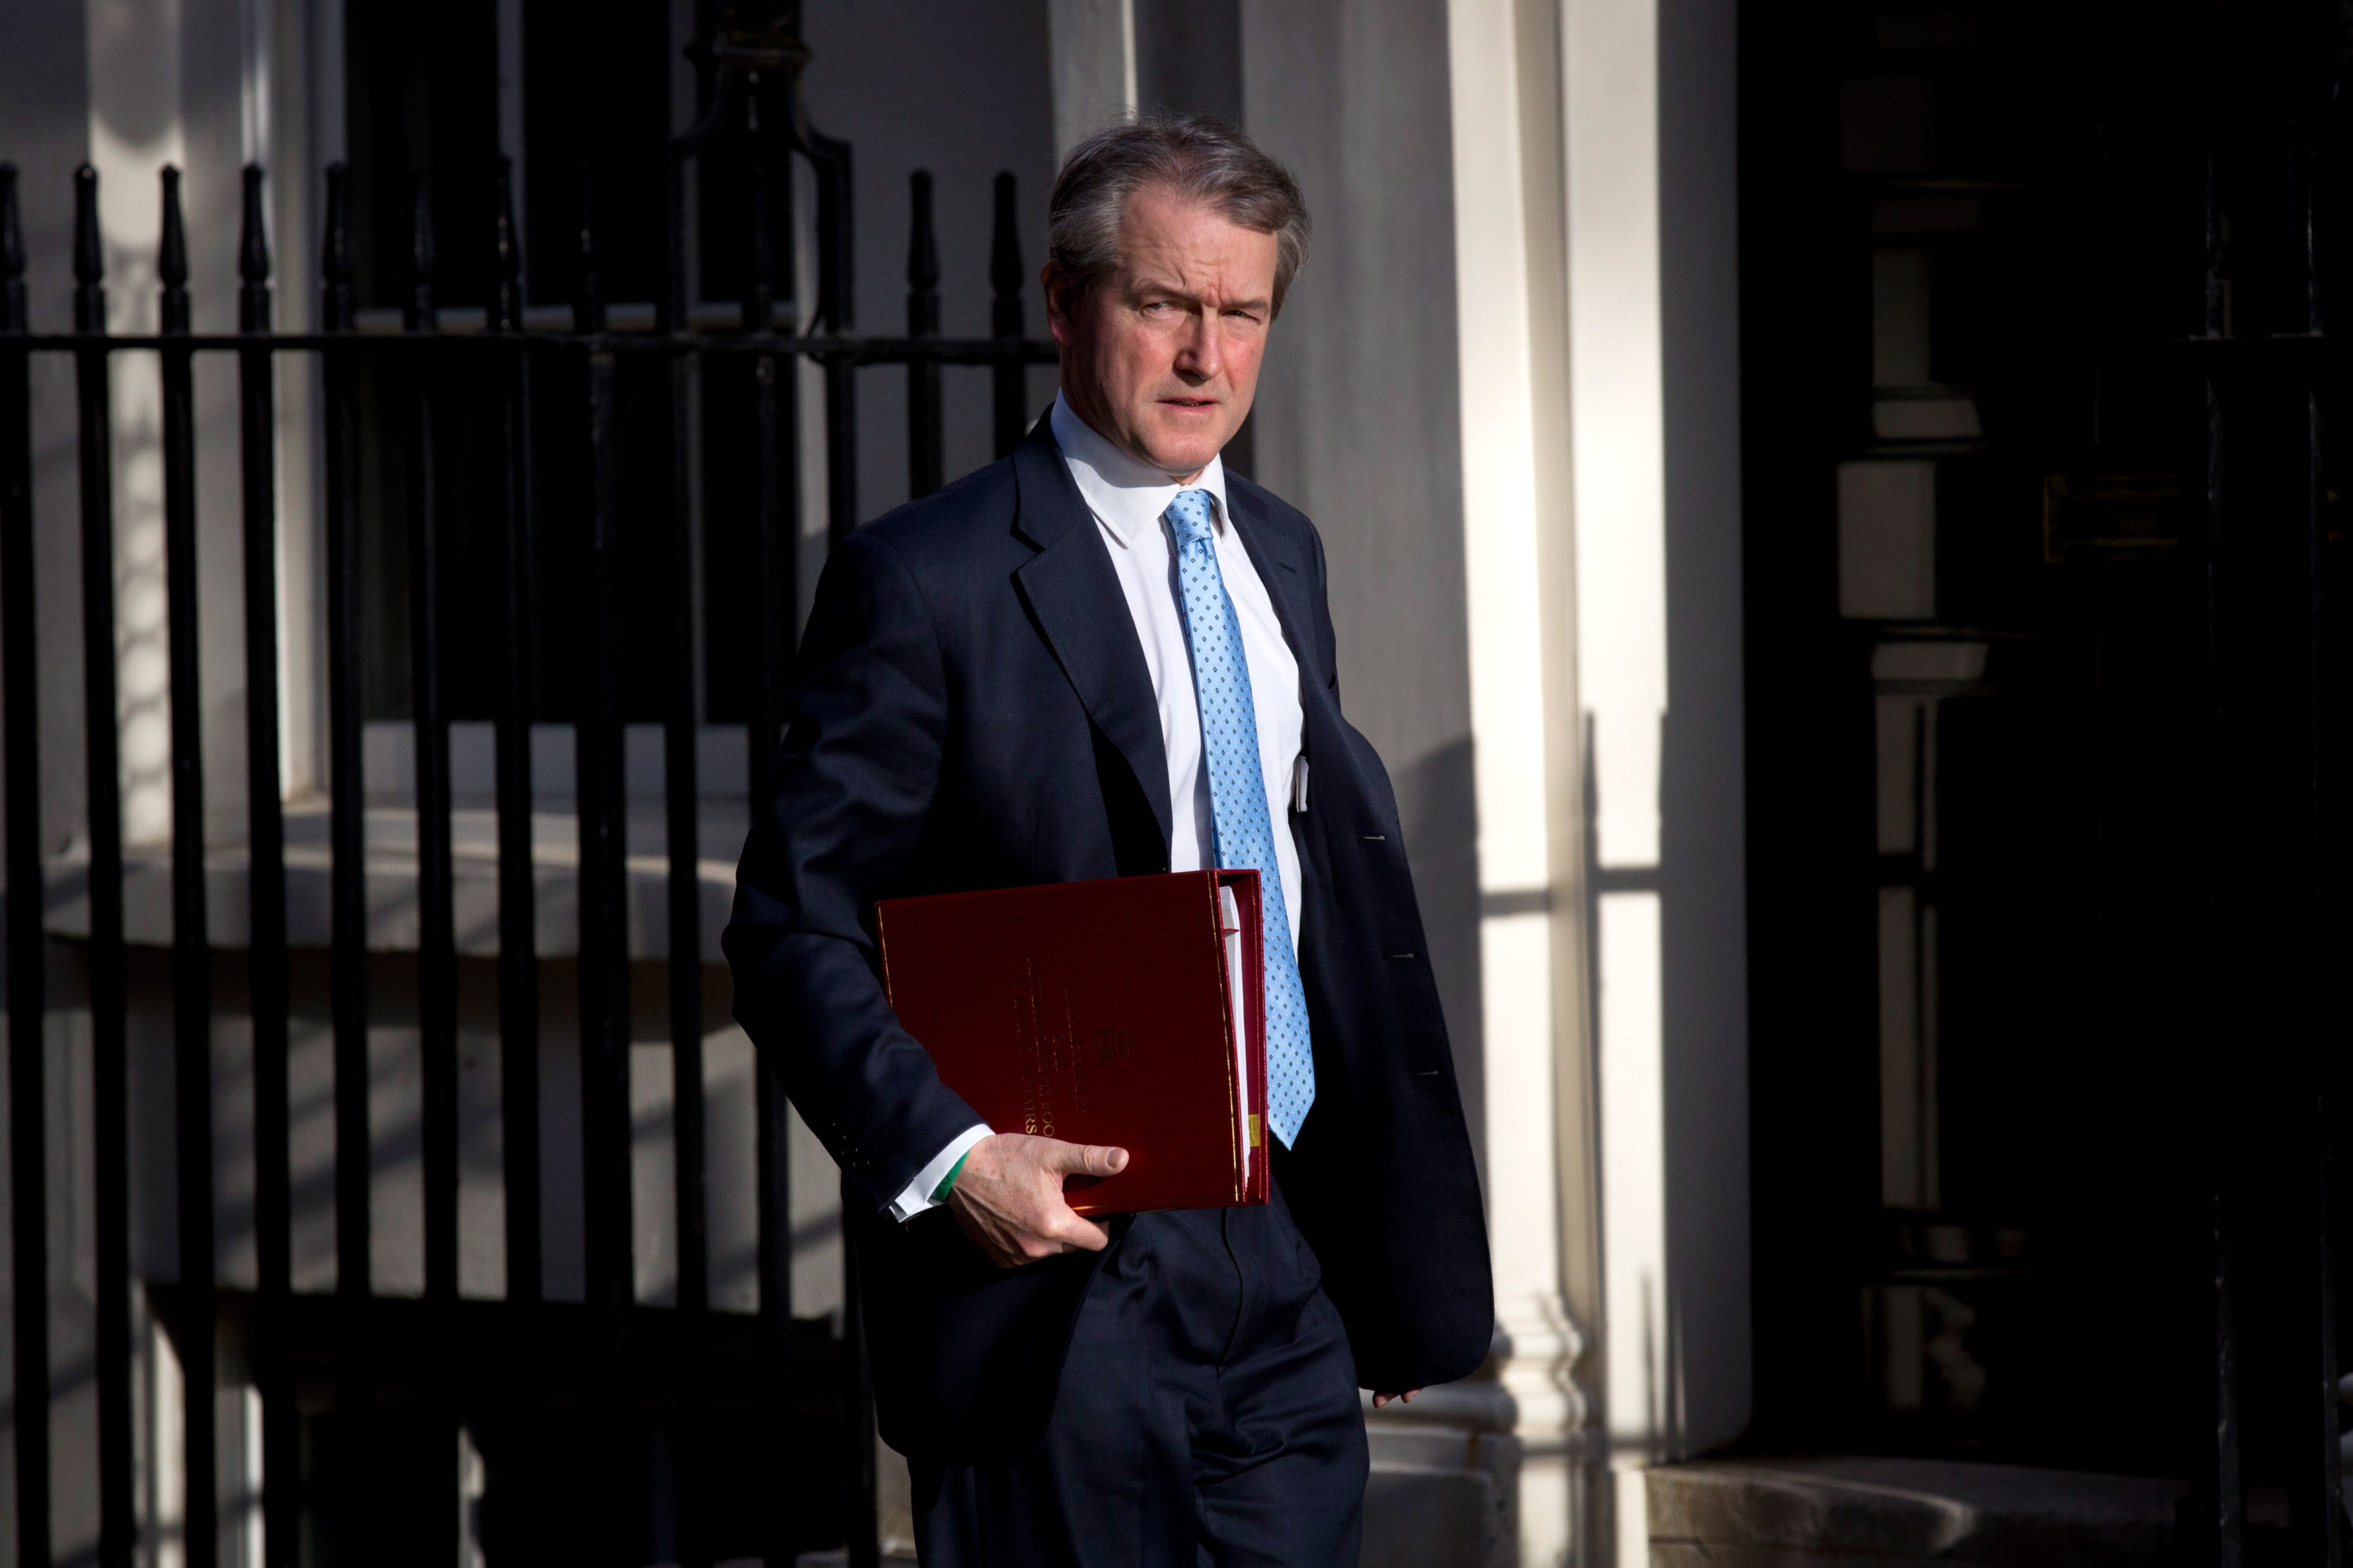 Owen Paterson resigned after a row about his second job